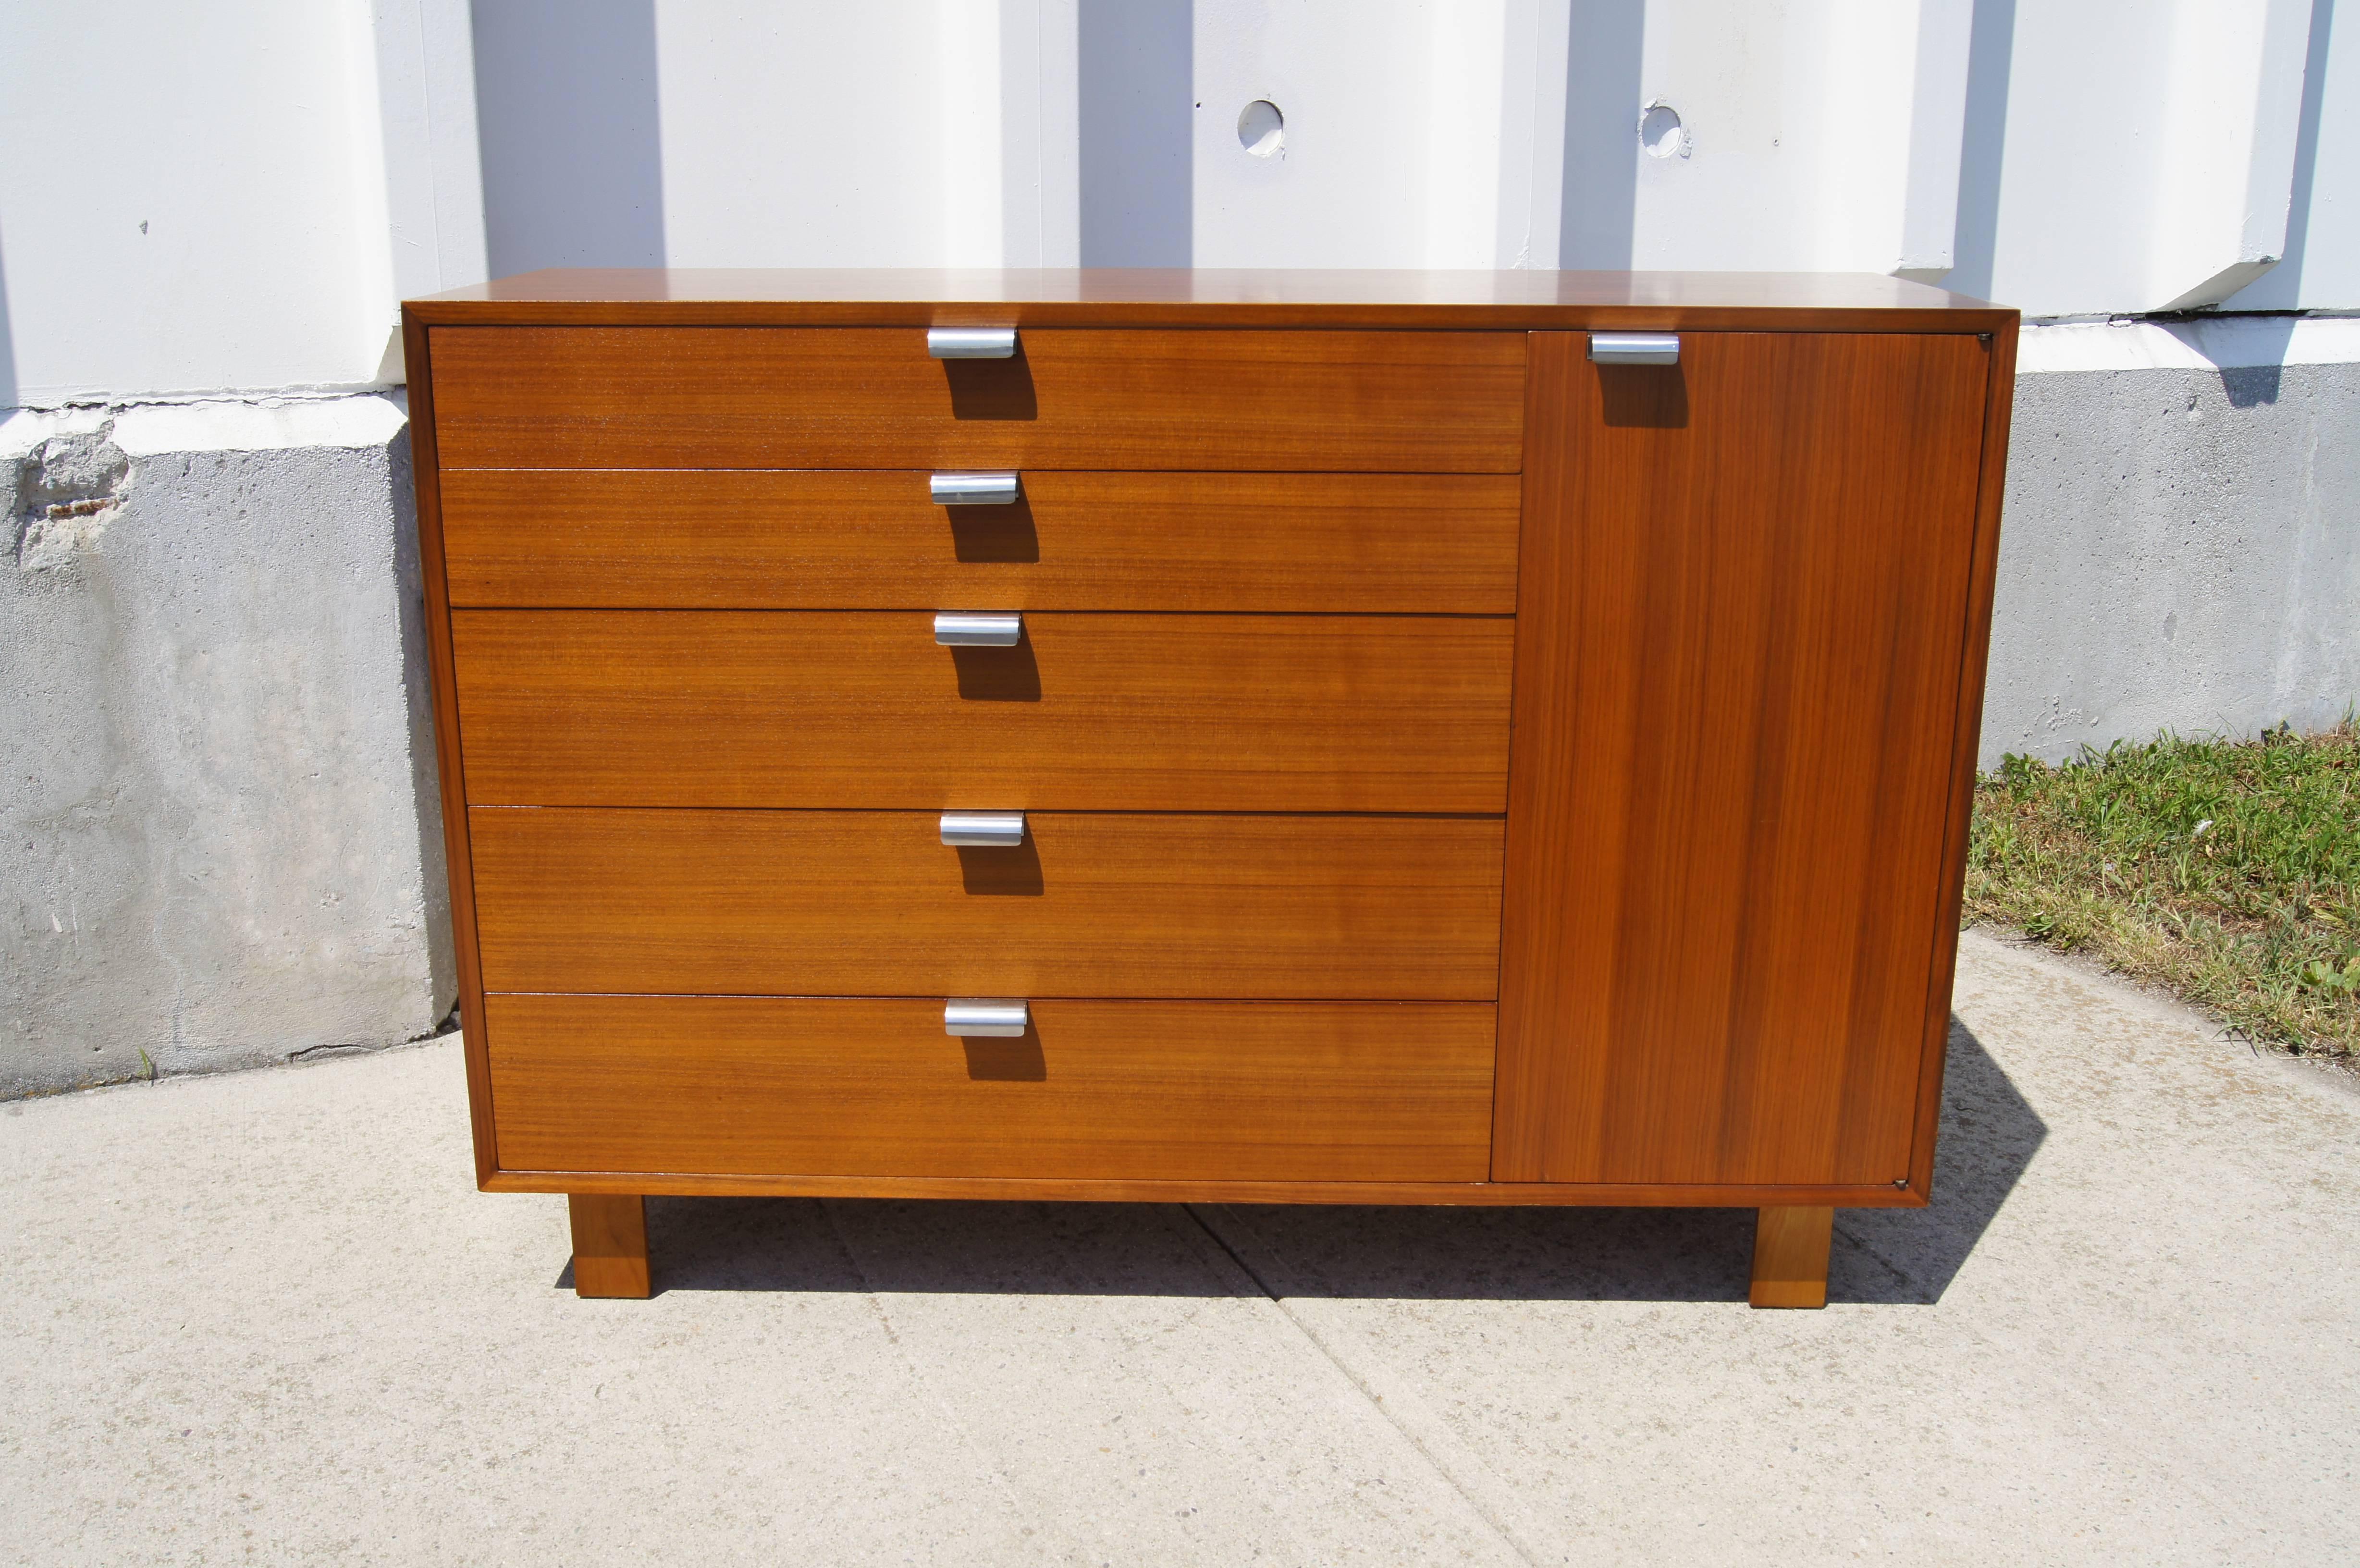 American BSC Dresser/ Cabinet by George Nelson for Herman Miller